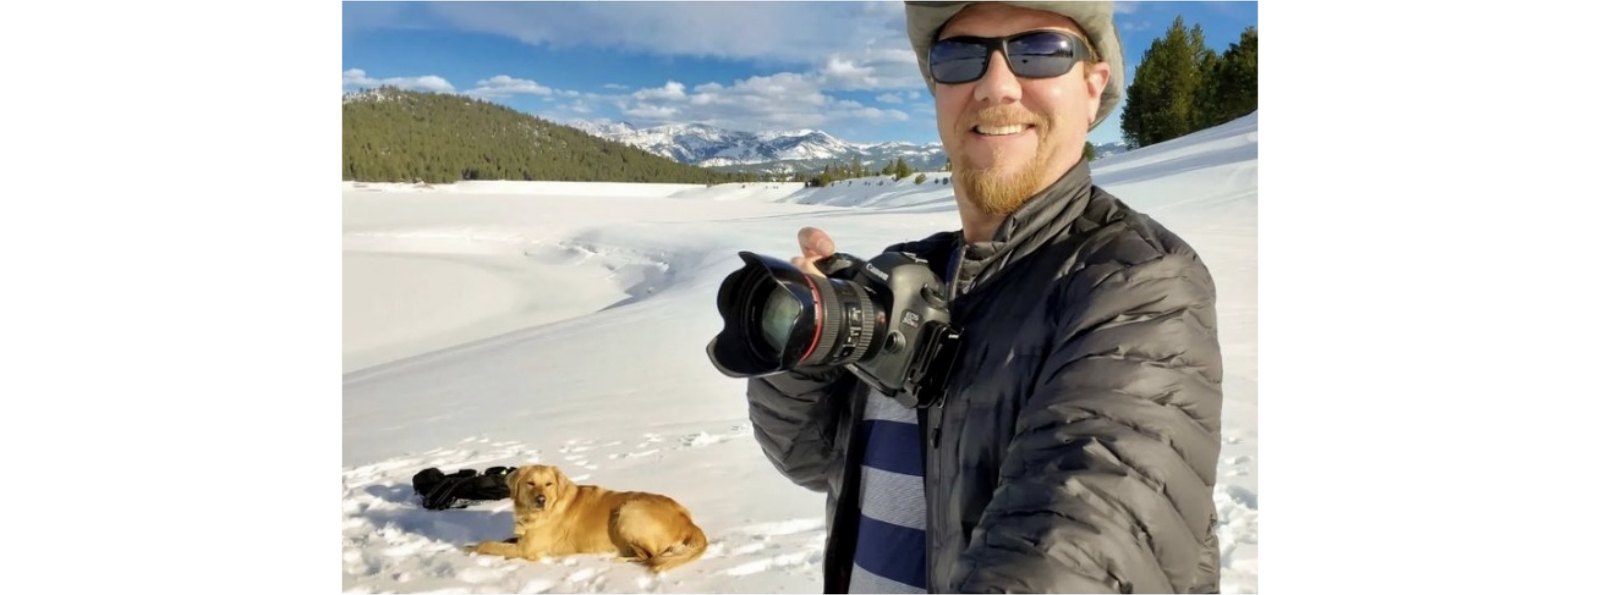 BIG LIFE Connections: An Evening with Scott Thompson - Local Photographer